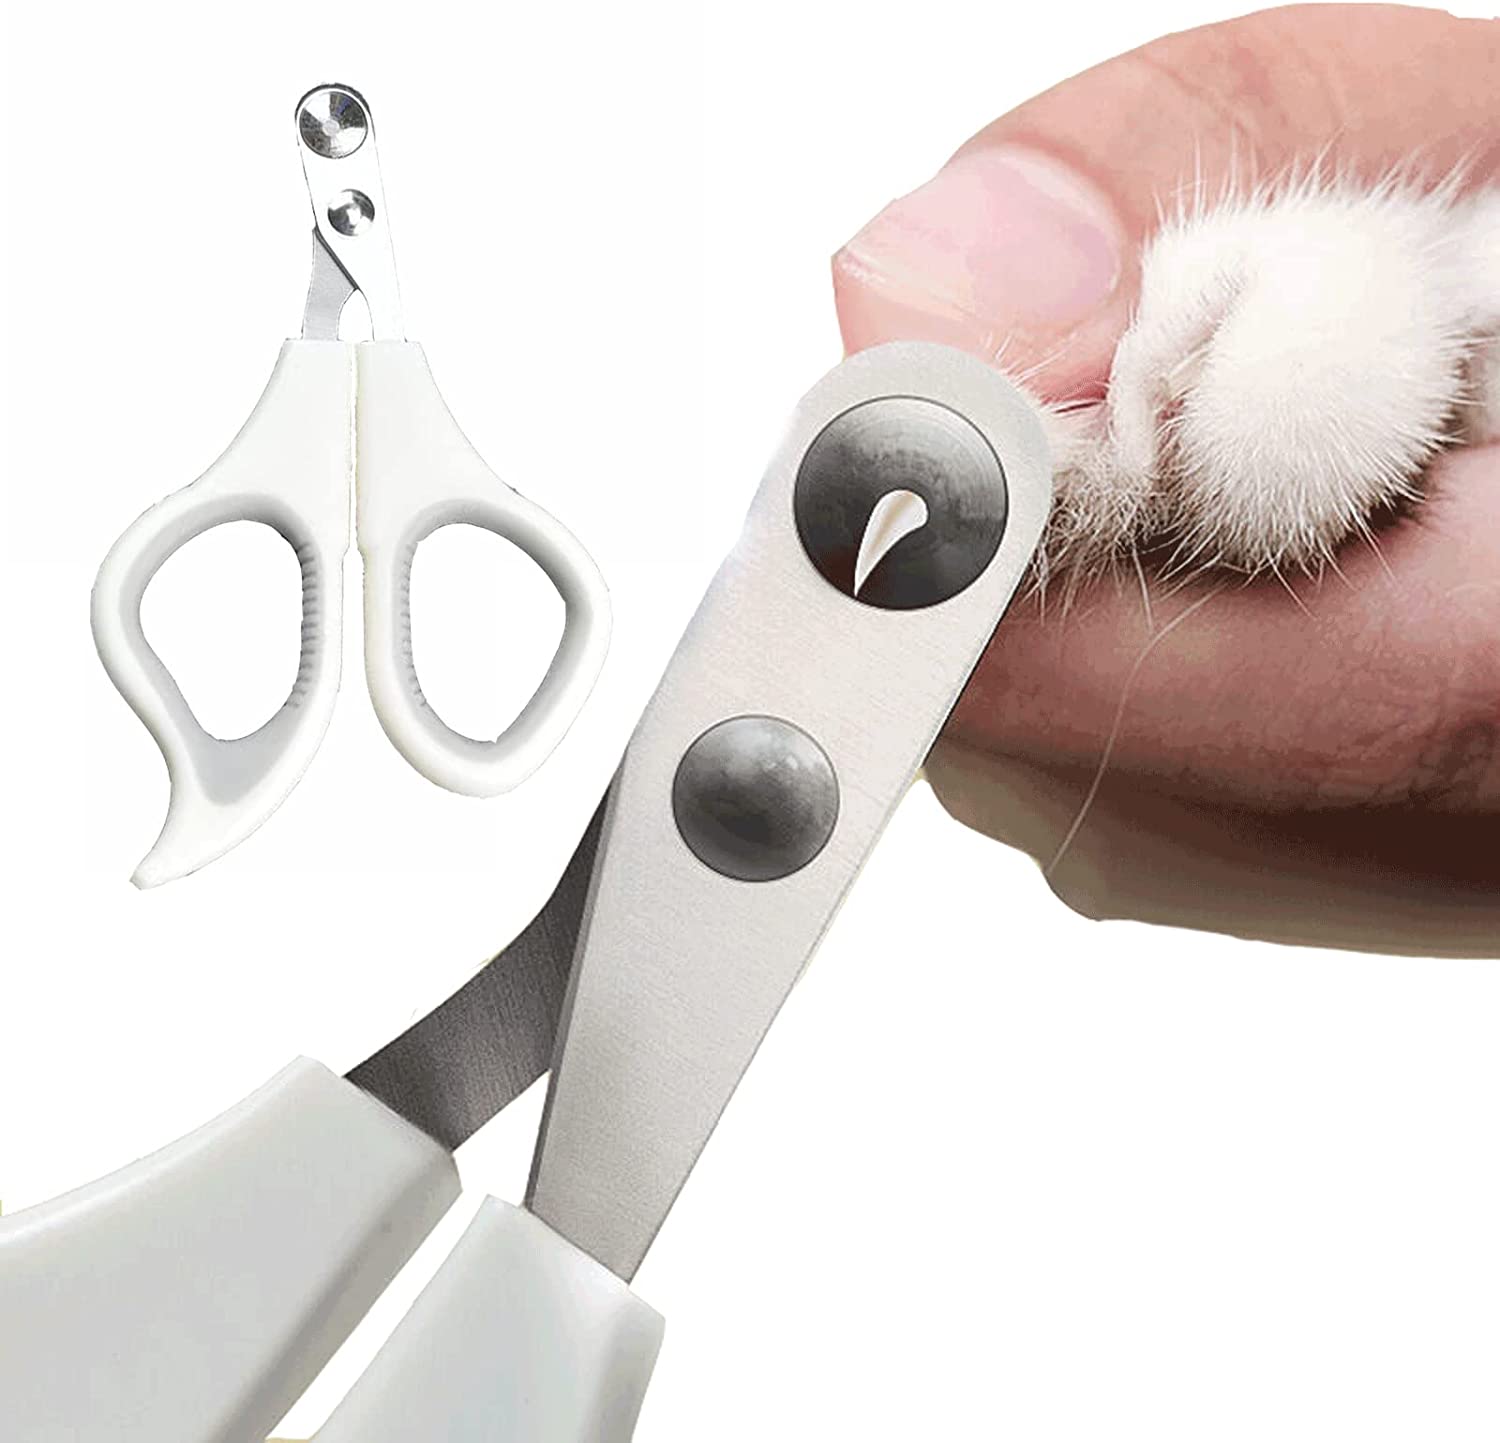 Useful tips about trimming a cat's claws